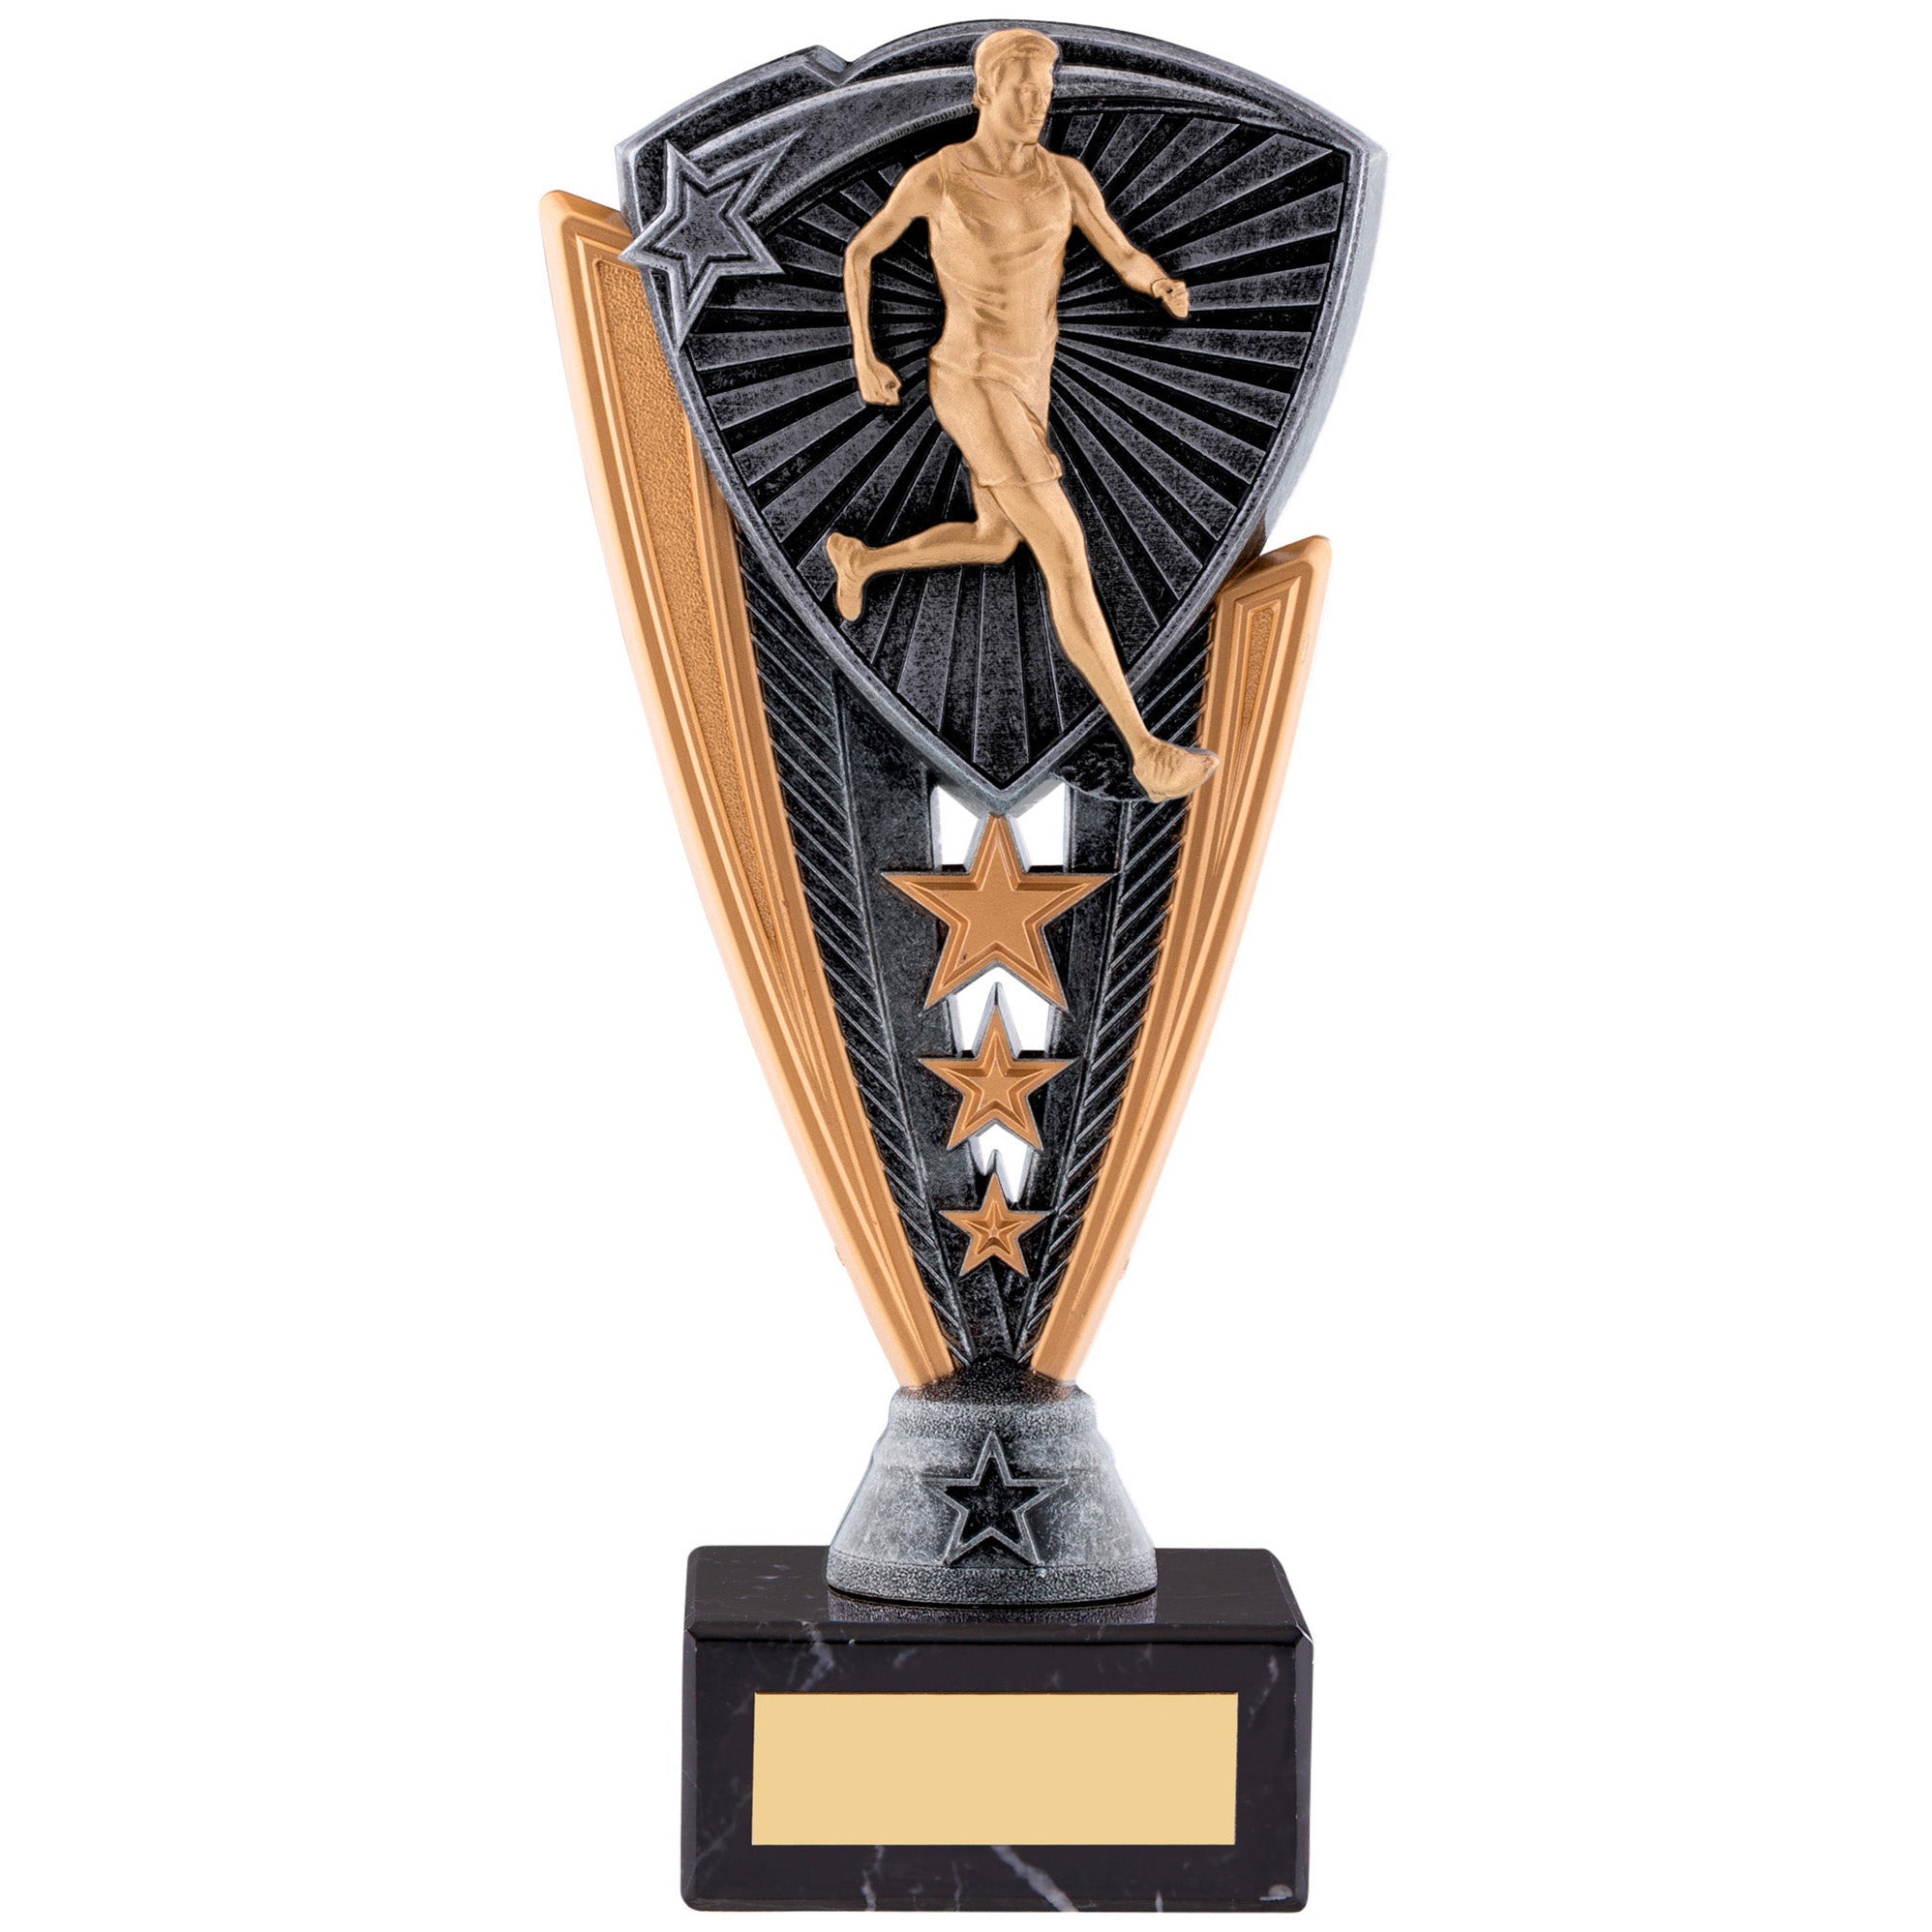 Male Runner Utopia Award with Engraved Plaque on Marble Base